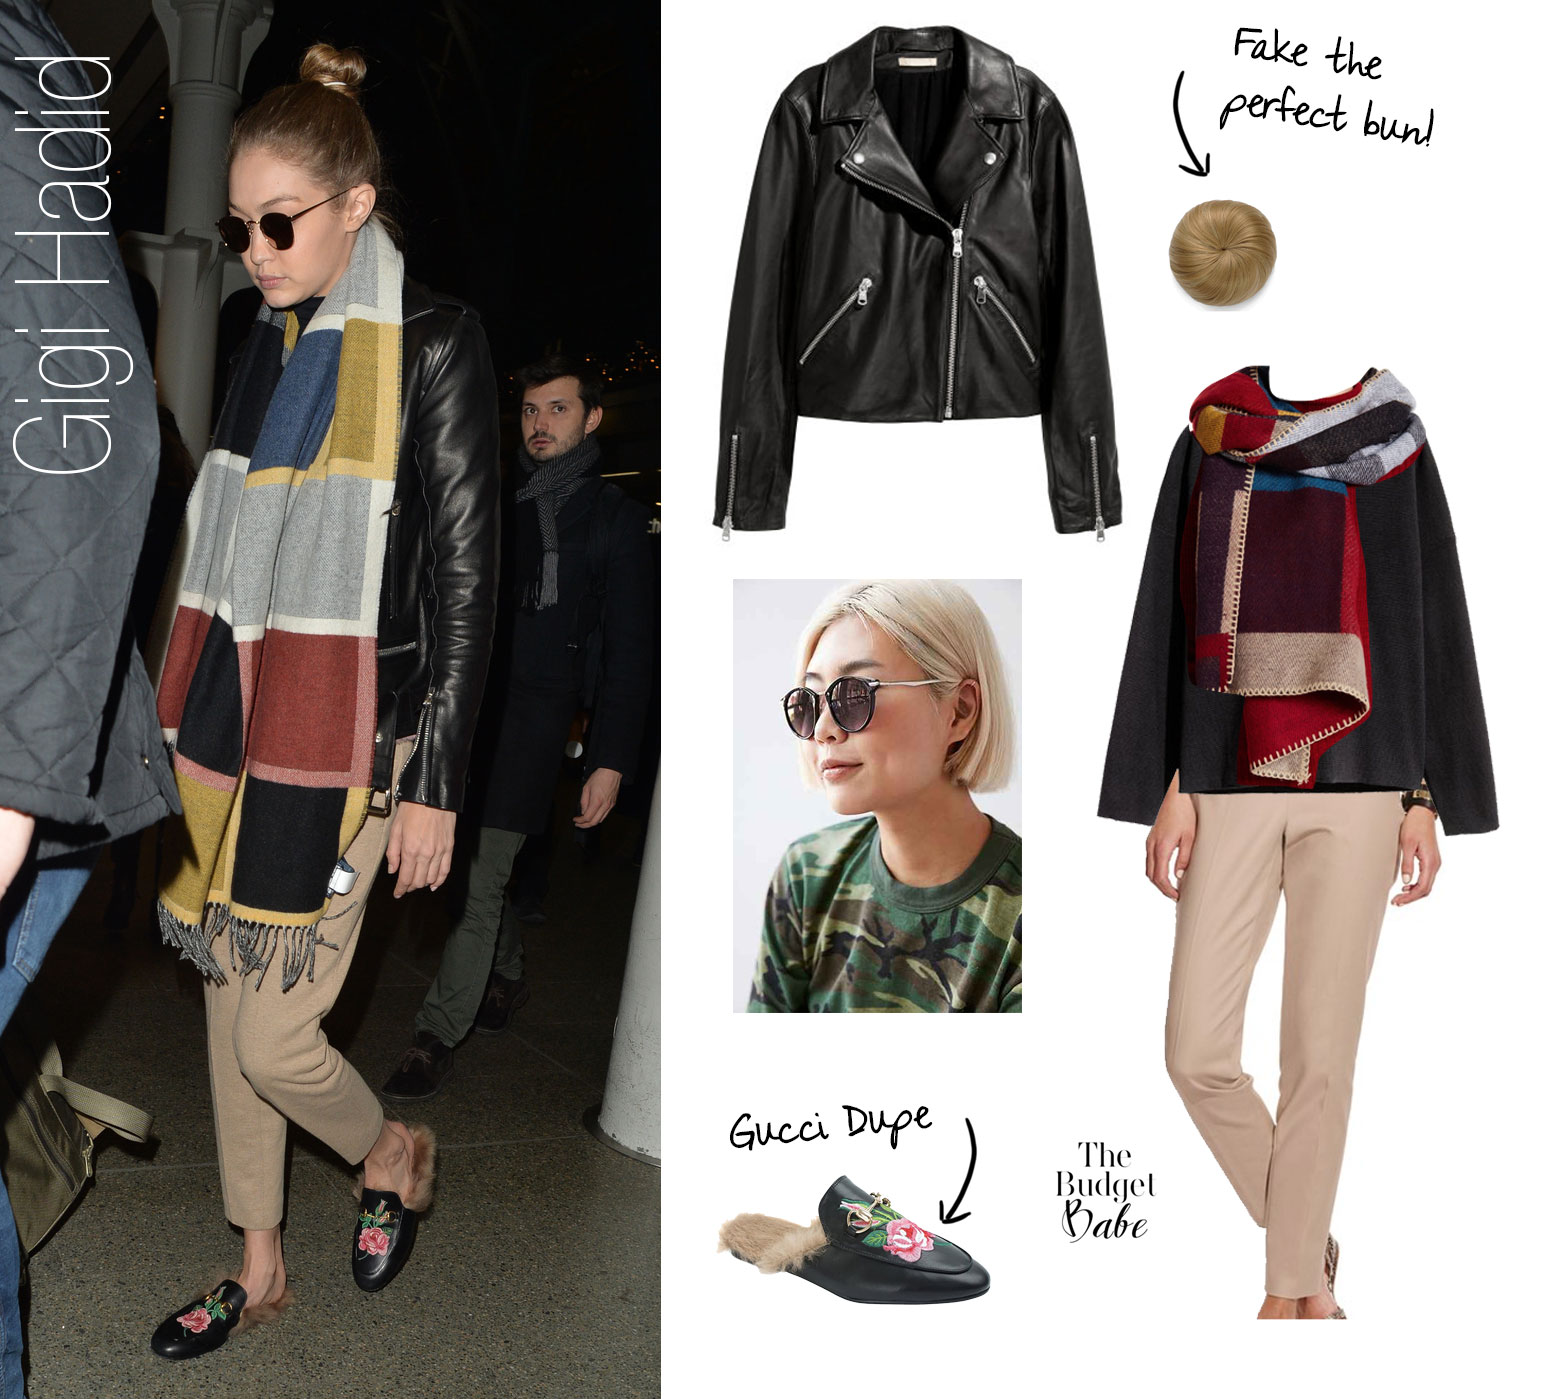 Gigi Hadid's Colorblock Scarf and Gucci Loafers Look for Less